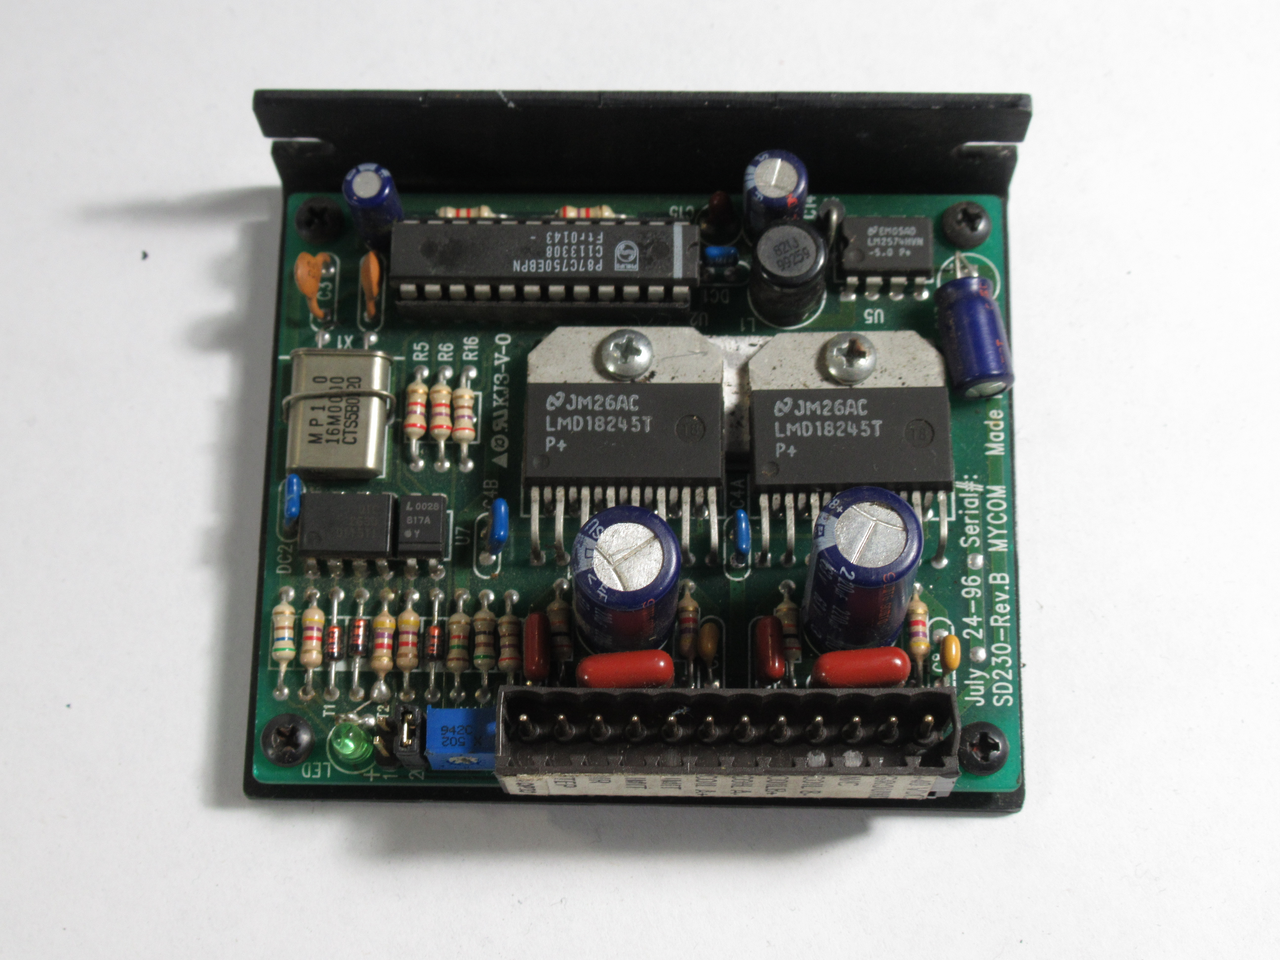 Generic PL4.0-QFHH Sink Driver for 24VDC PLC Interface USED